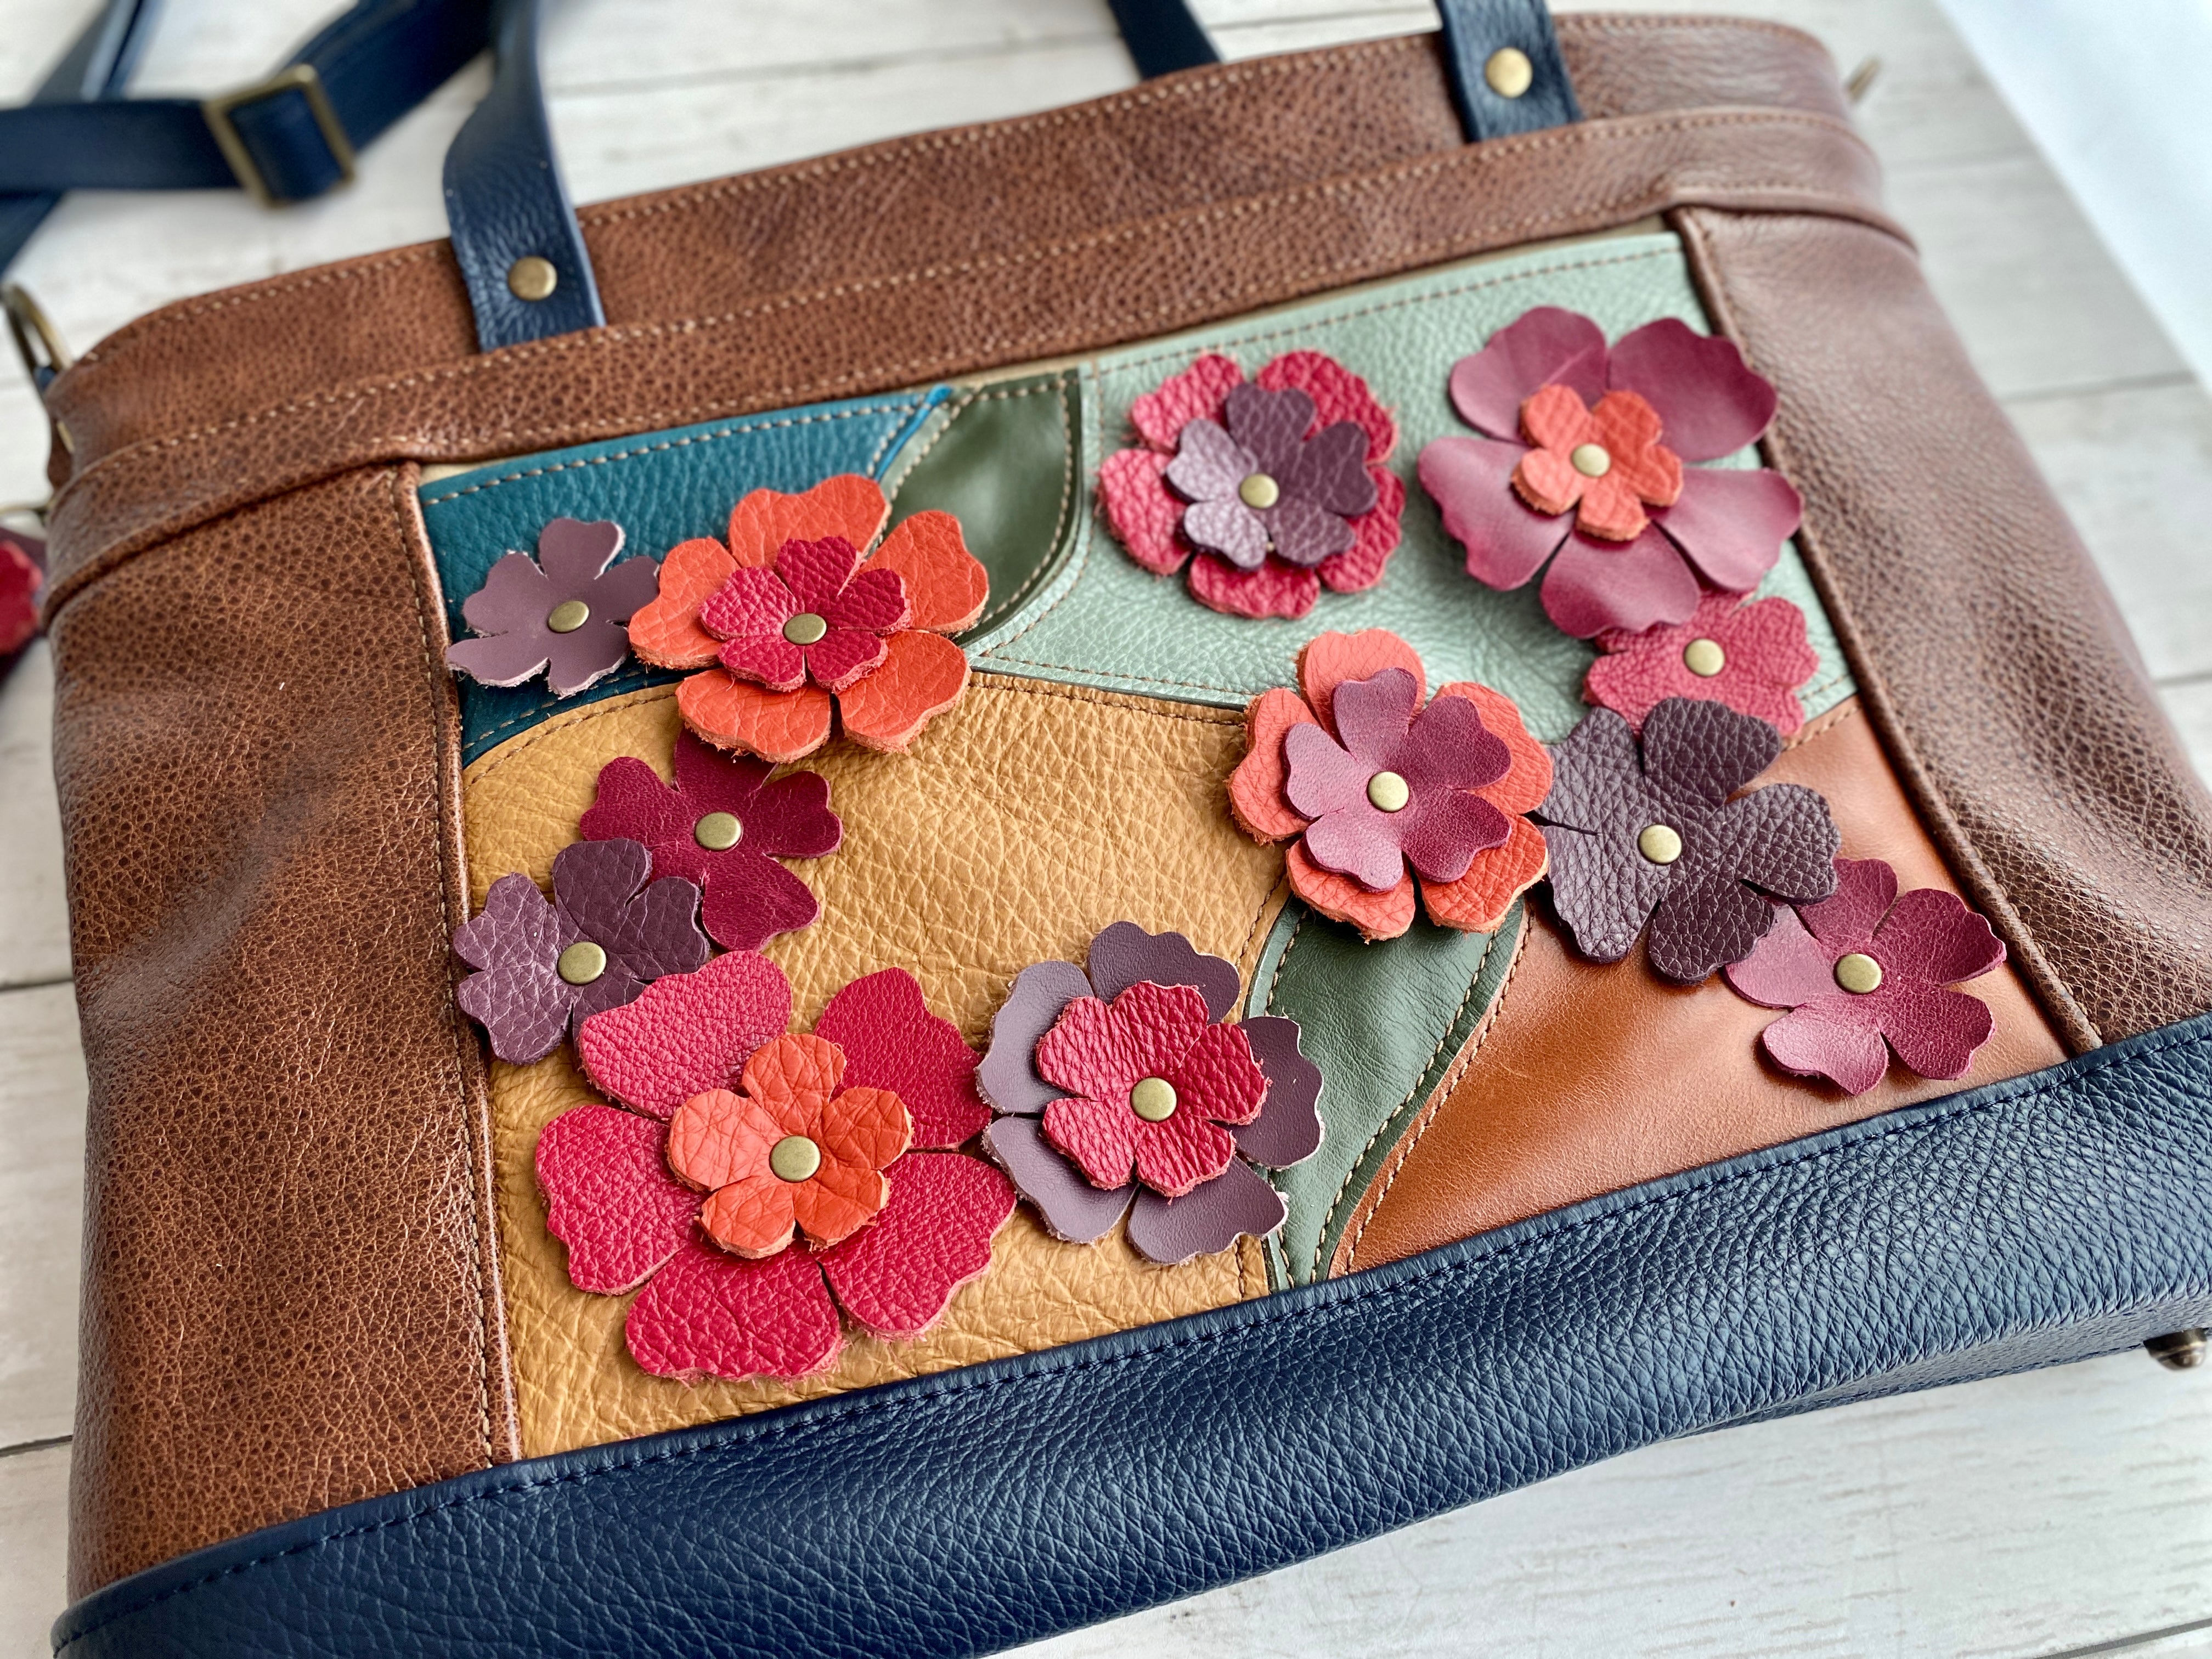 Archive Mini in Chestnut, Navy, Patchwork, Blossoms